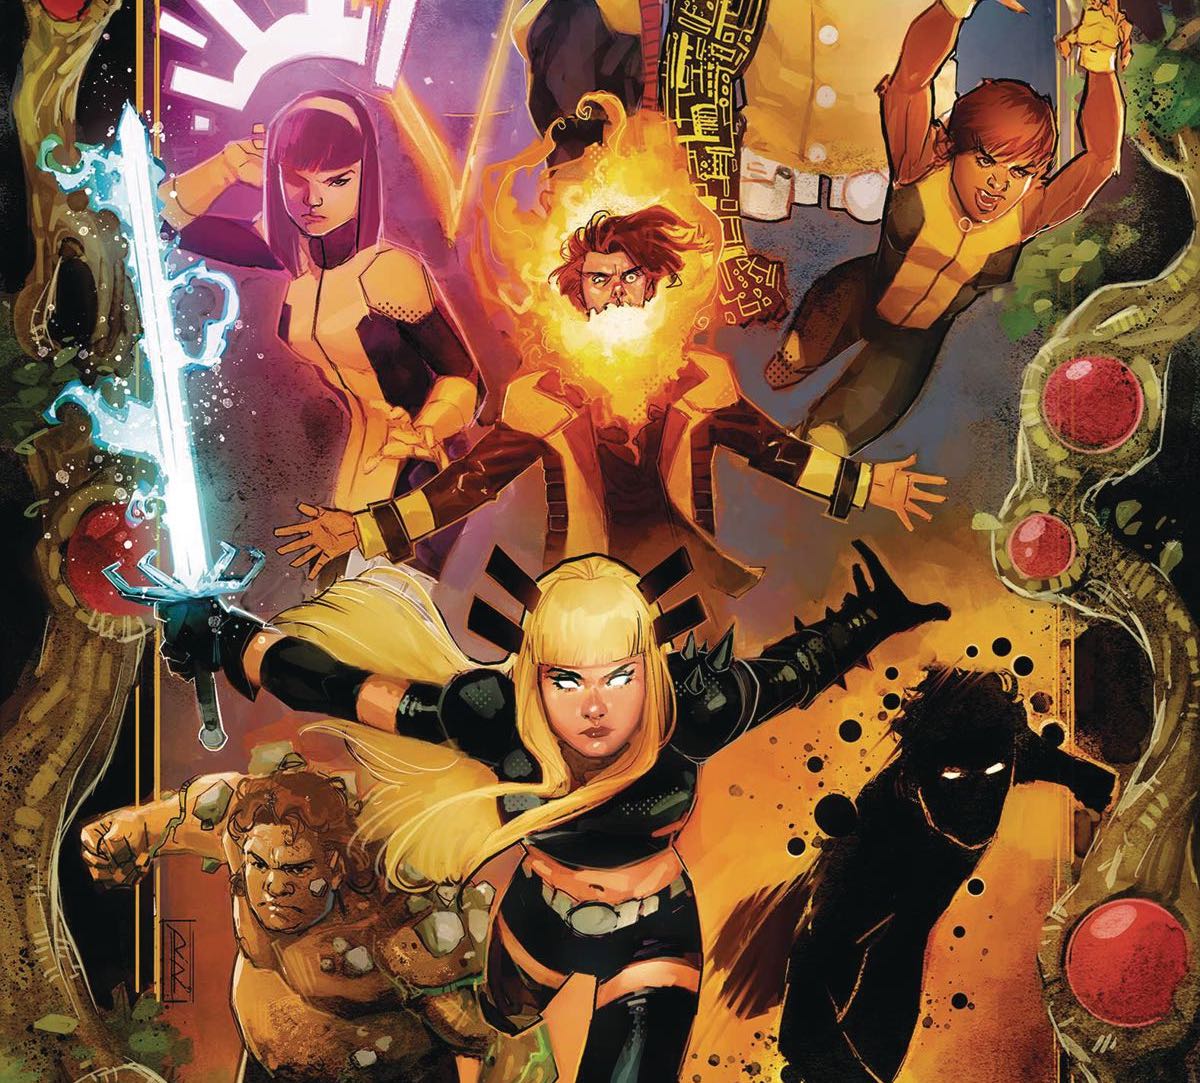 New Mutants #1 Review